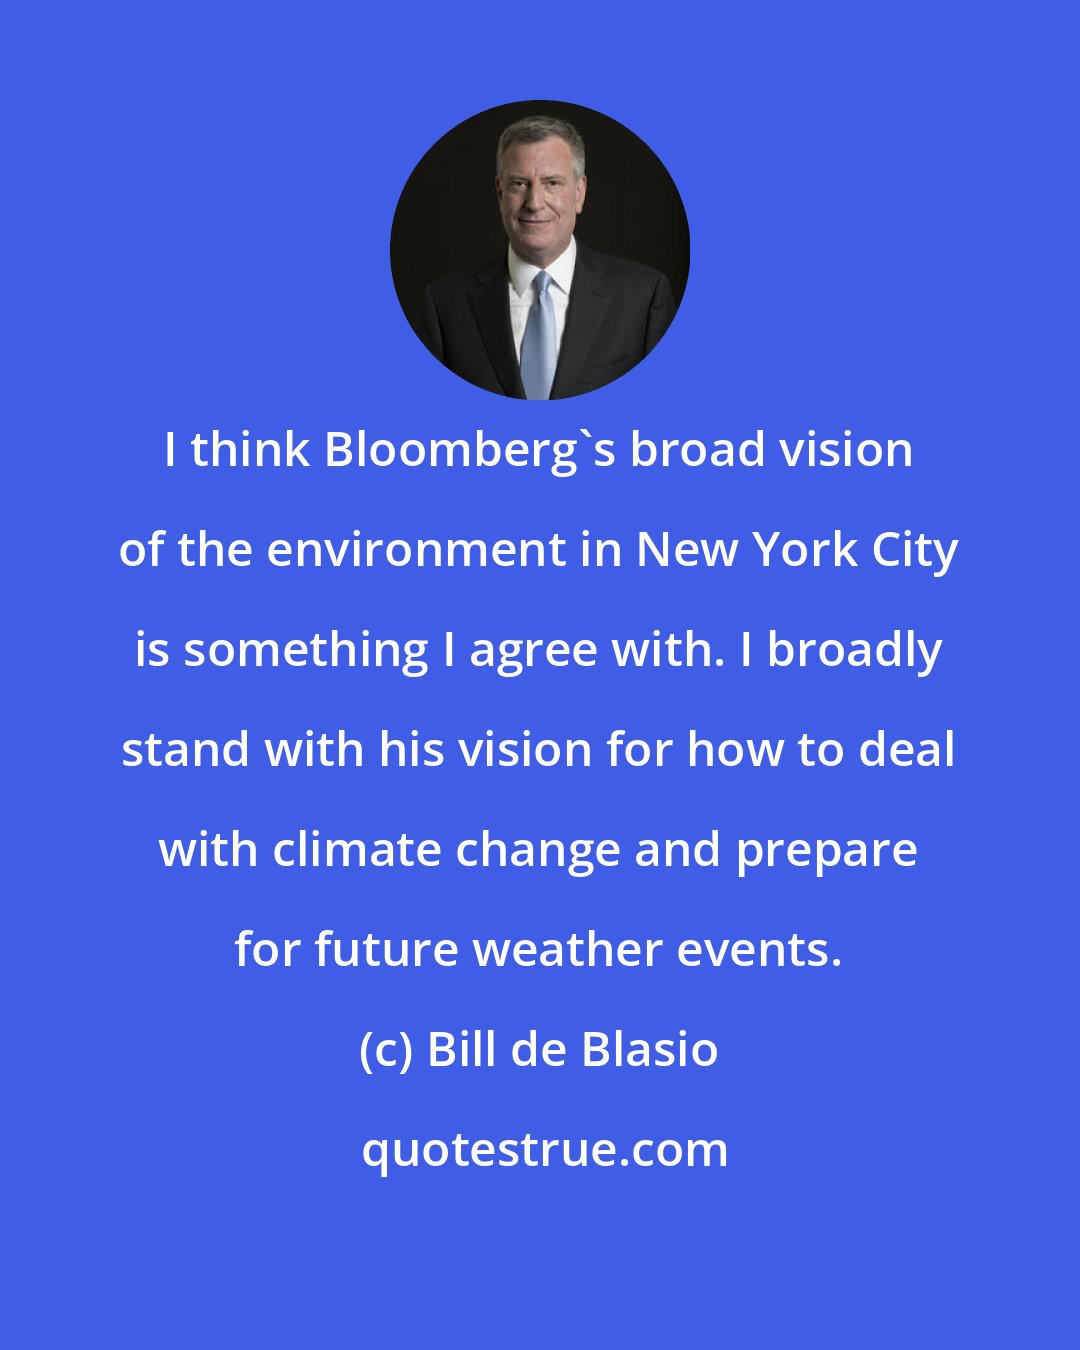 Bill de Blasio: I think Bloomberg's broad vision of the environment in New York City is something I agree with. I broadly stand with his vision for how to deal with climate change and prepare for future weather events.